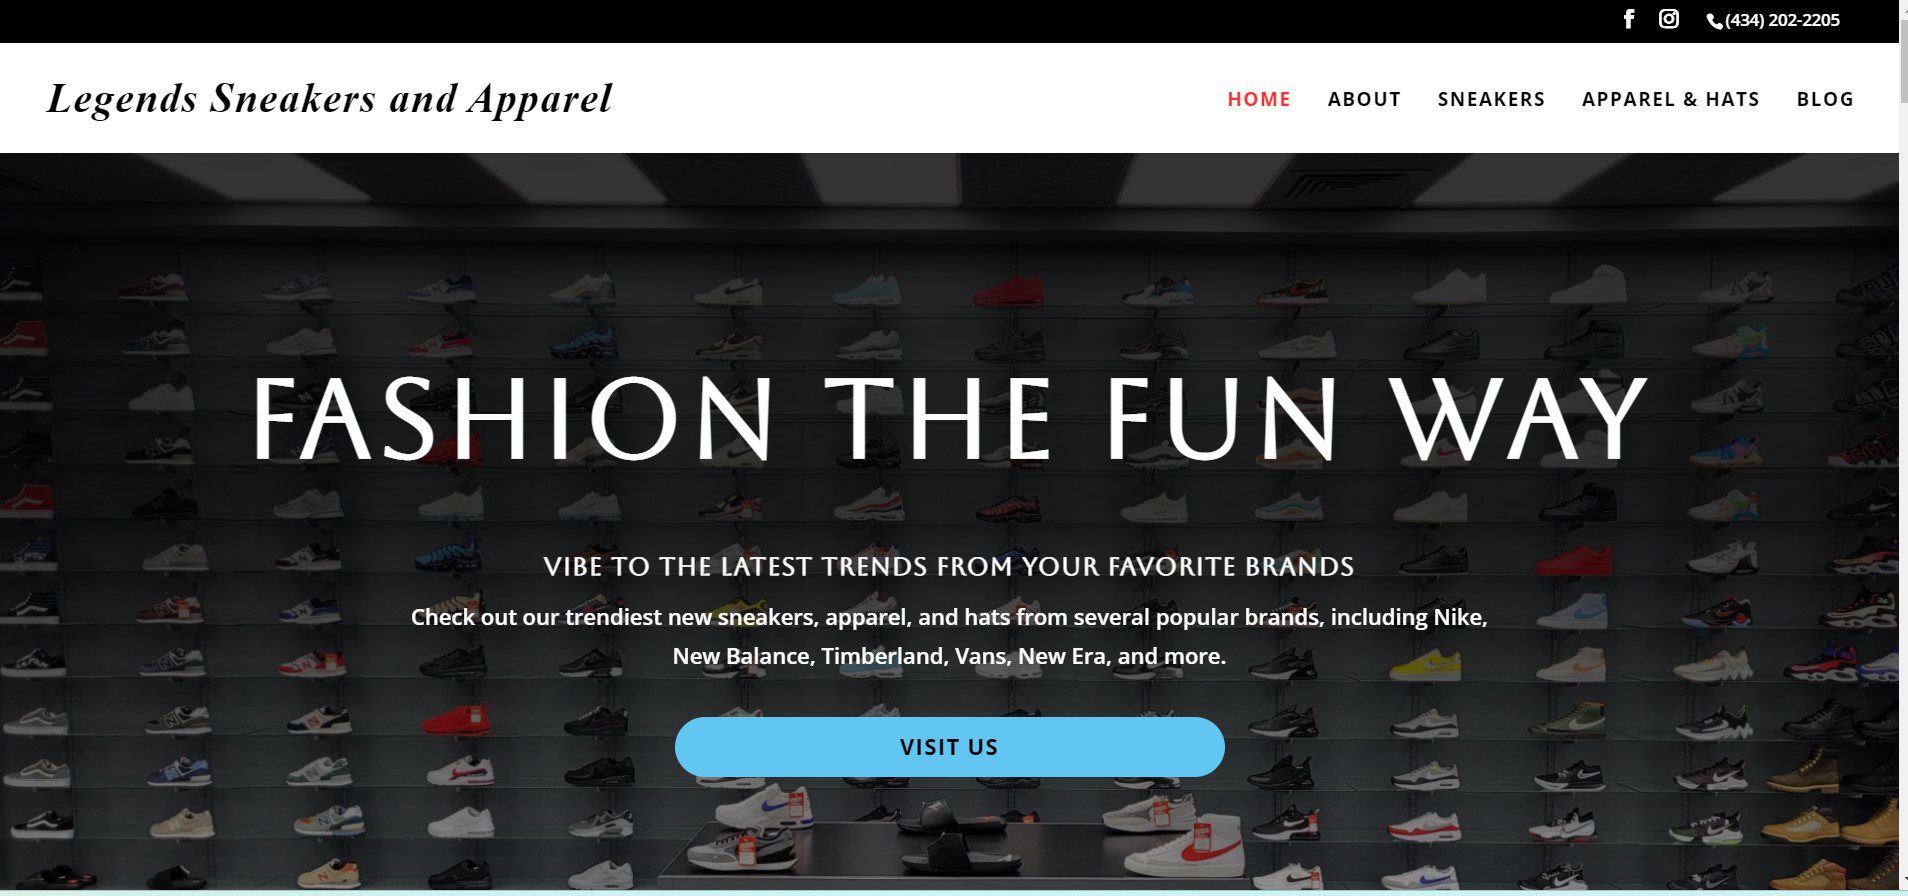 Legends Sneakers and Apparel Fashion the Fun Way